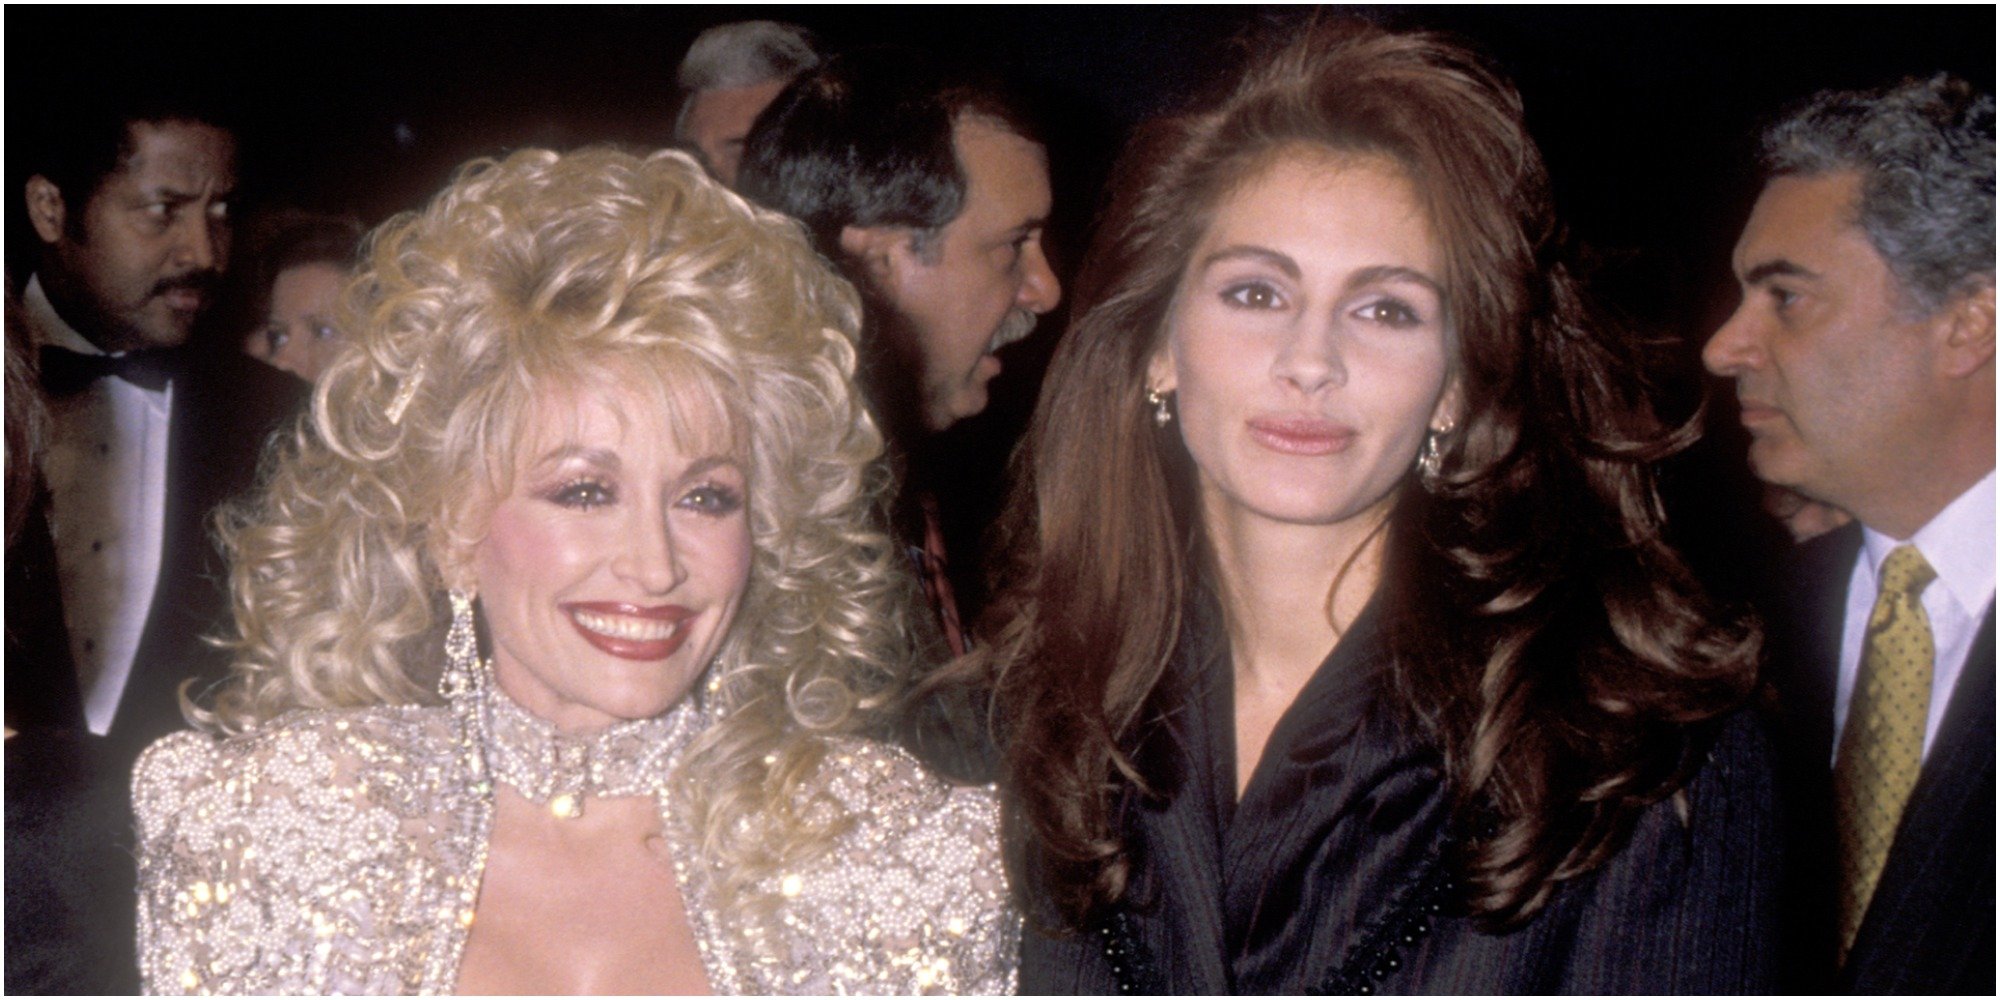 Dolly Parton and Julia Roberts at the premiere of the film "Steel Magnolias."